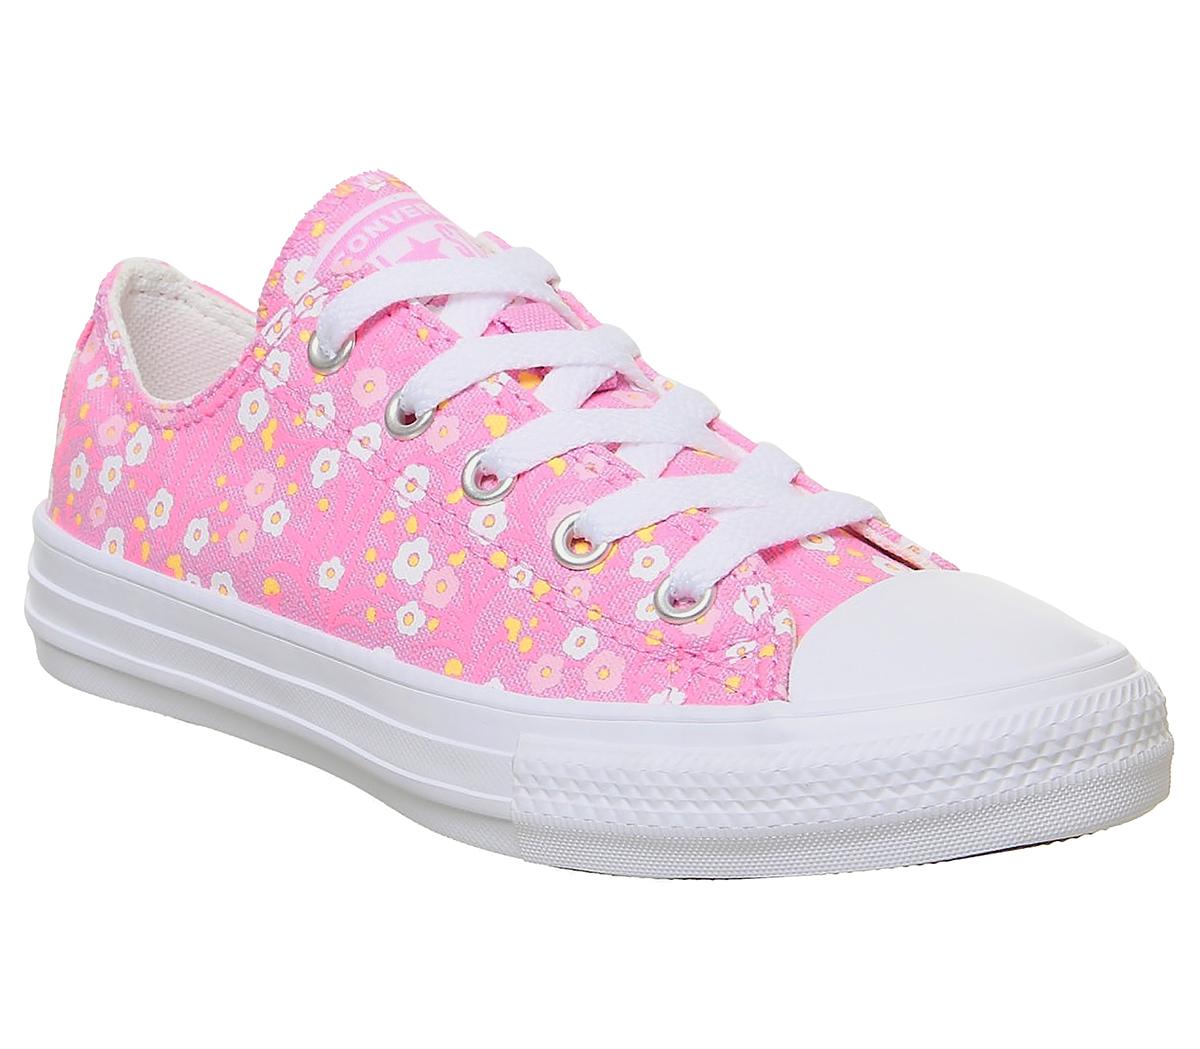 ConverseAll Star Low Youth TrainersPeony Pink Topaz Gold White Floral